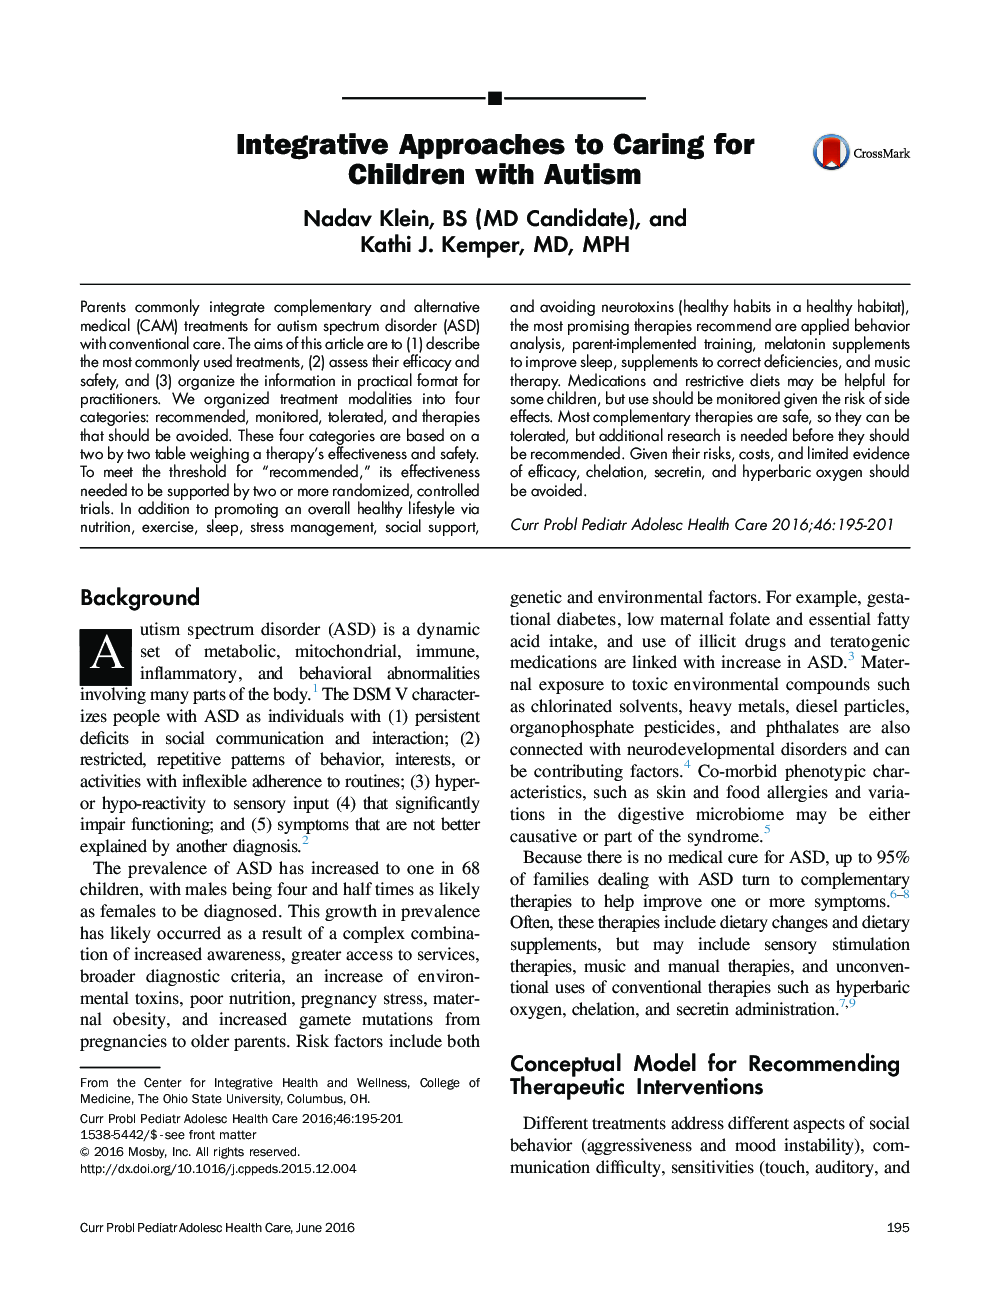 Integrative Approaches to Caring for Children with Autism